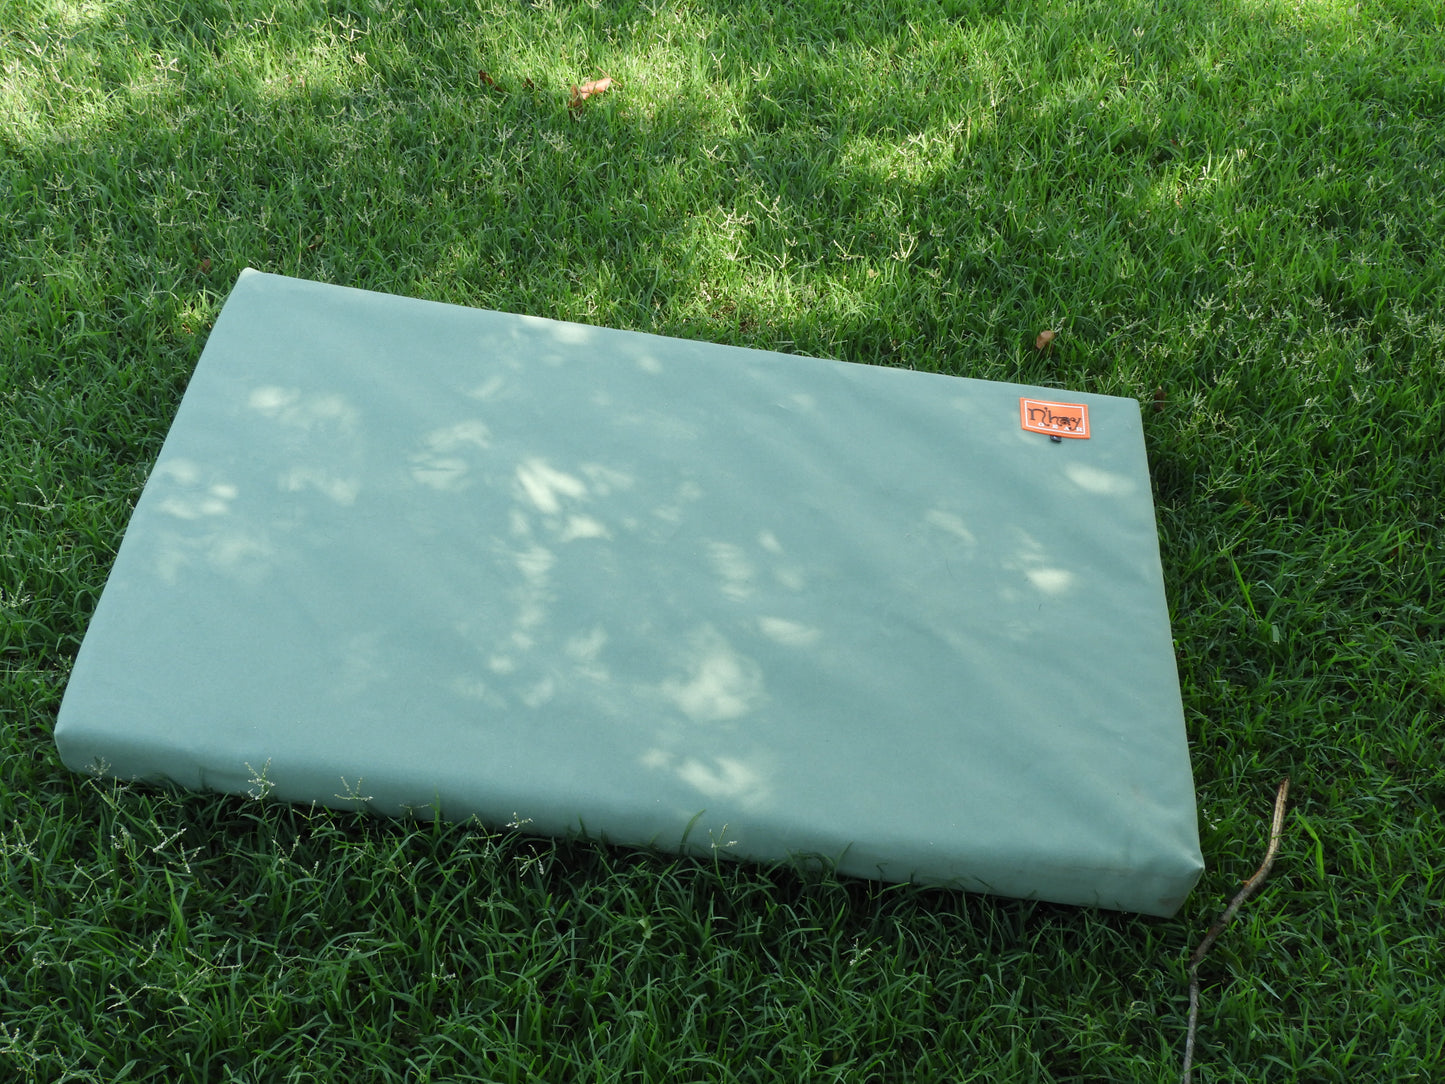 N'hay Dog Bed Cover - Heavy Duty Canvas